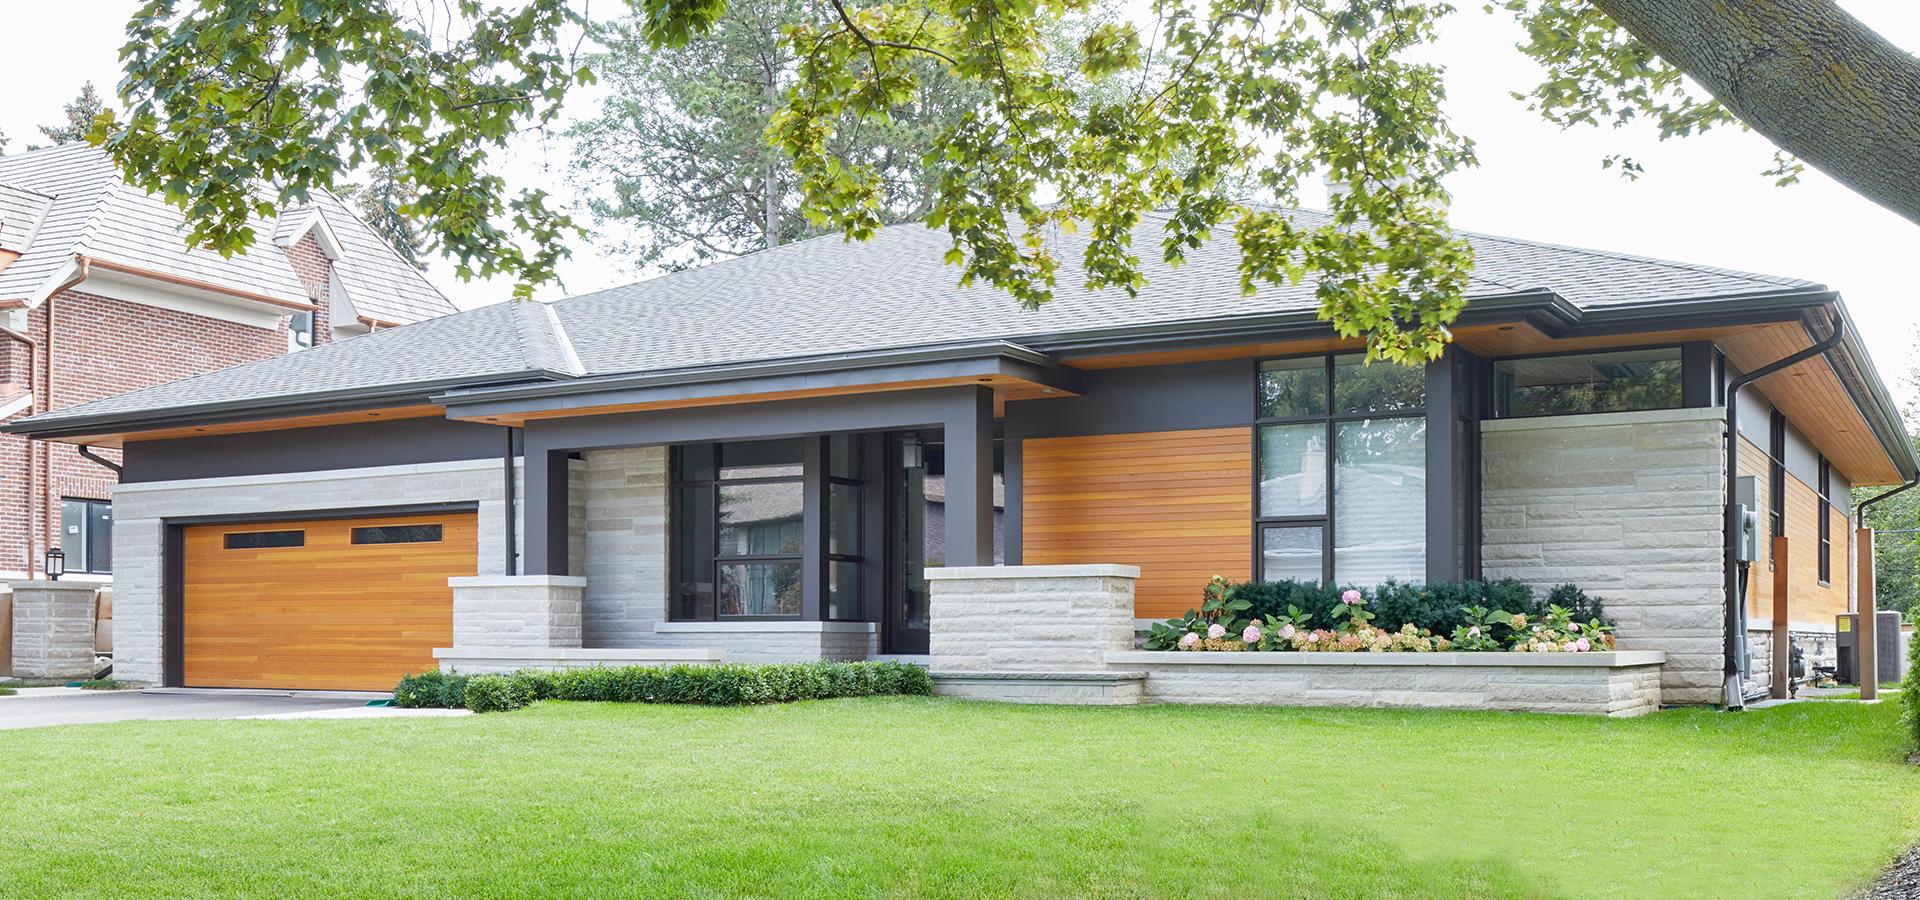 Modern bungalow with wood garage door, light stone and metal cladding.